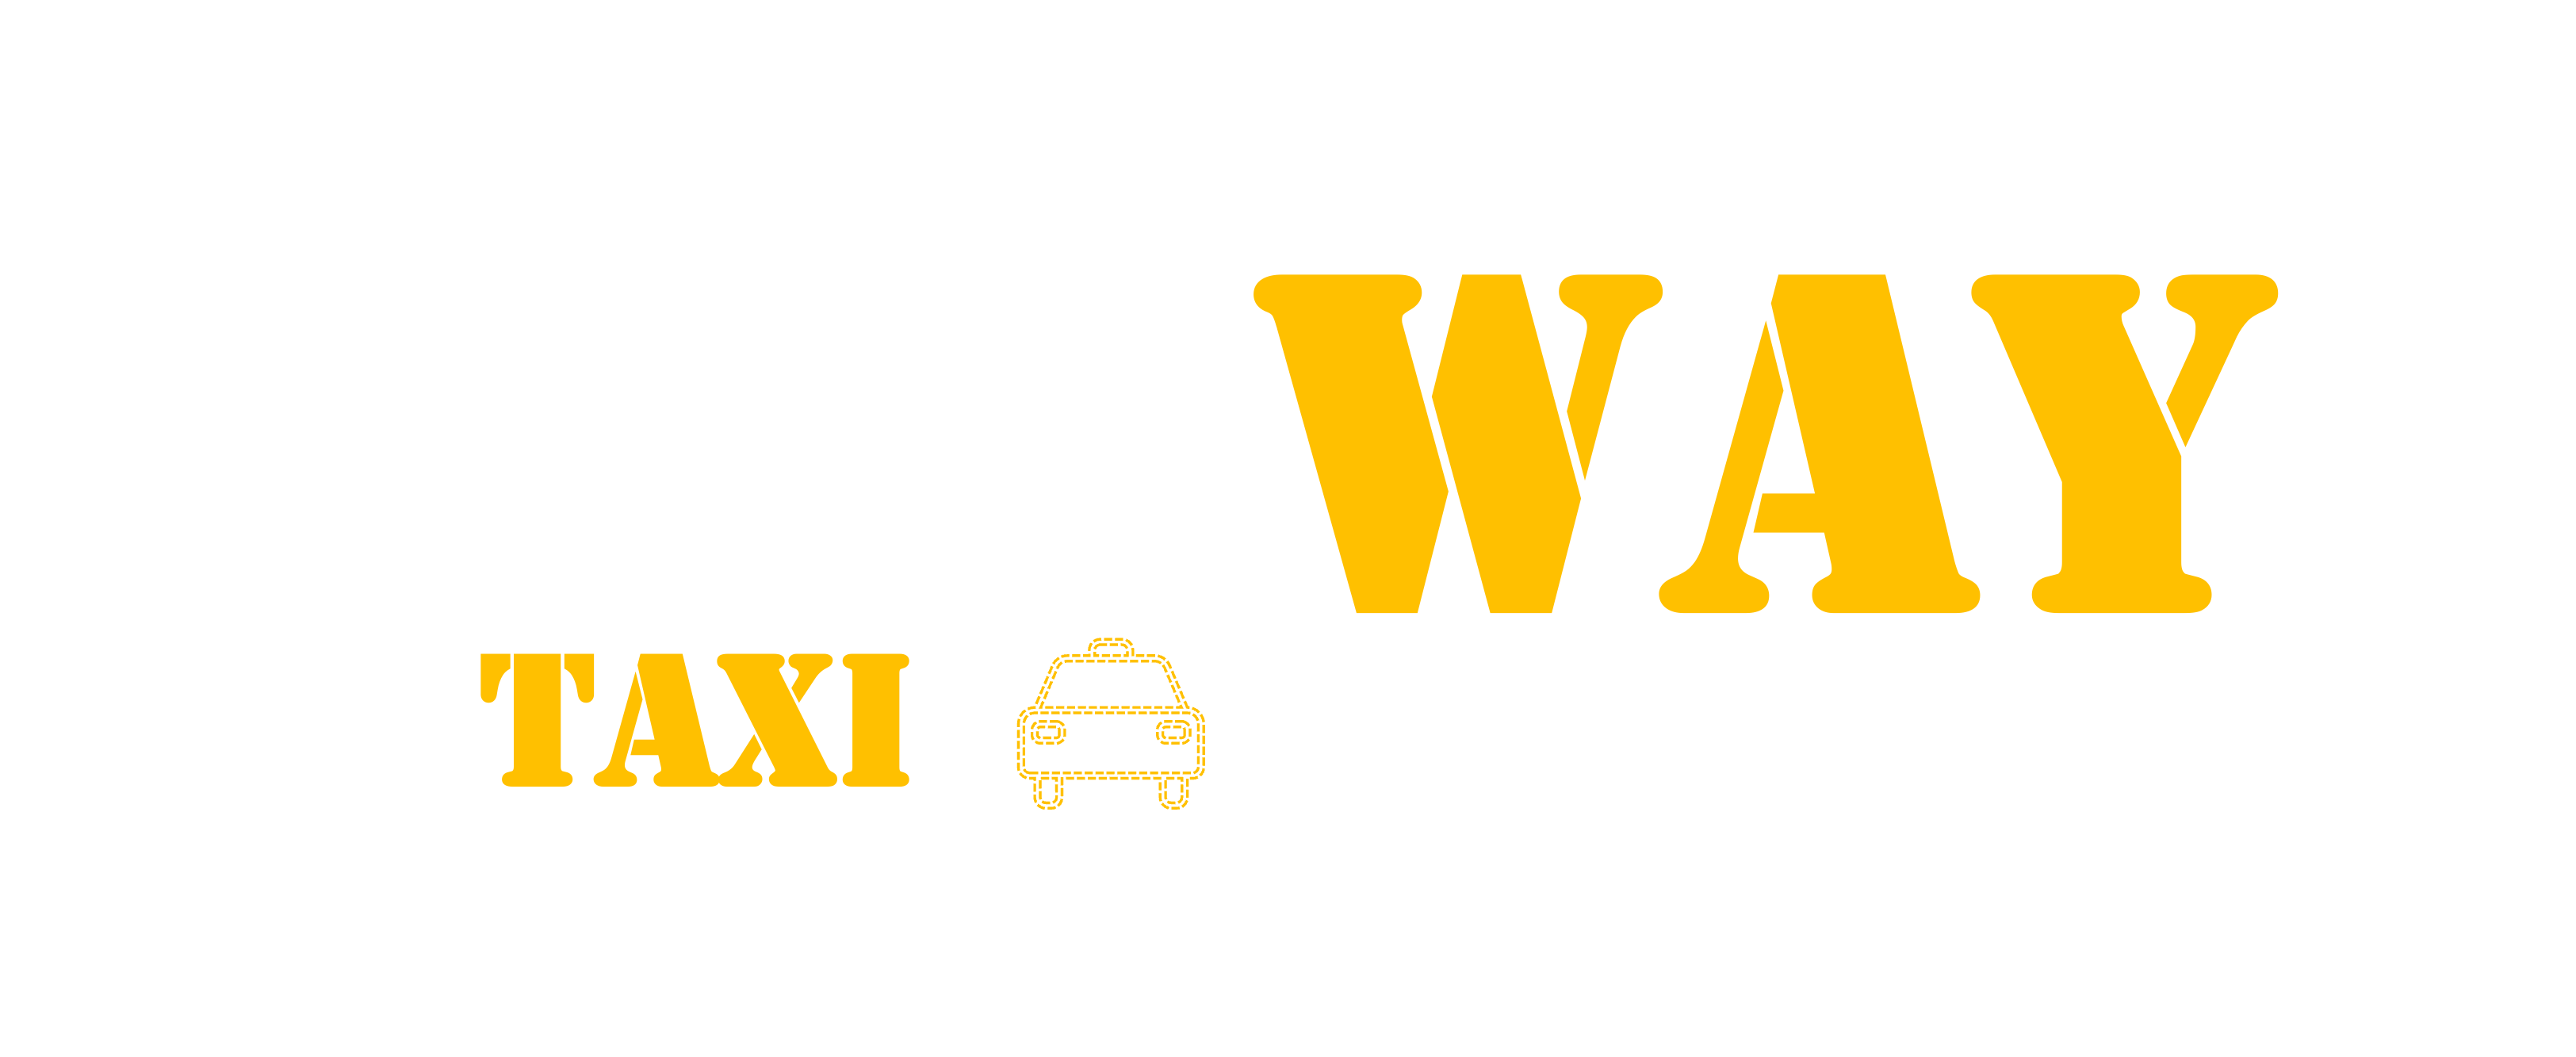 Oneway taxi booking